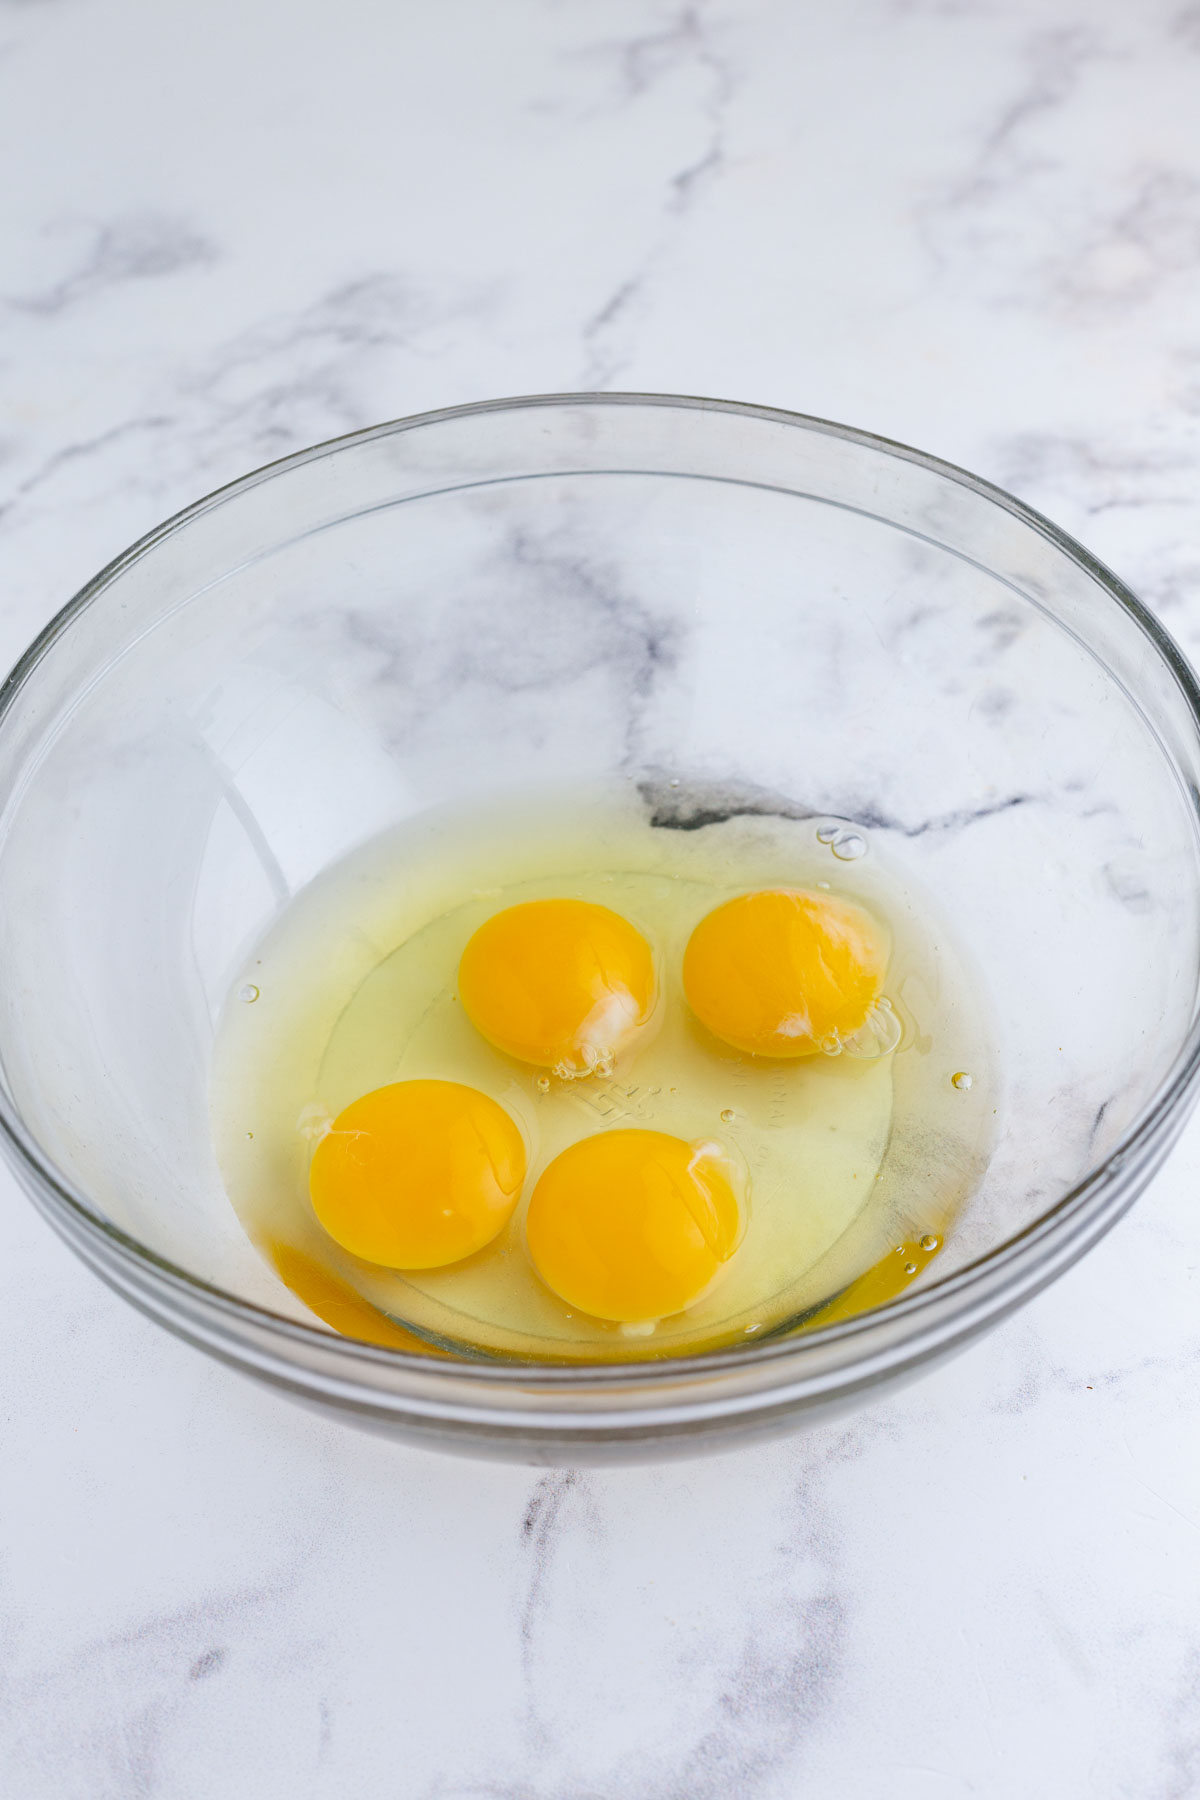 Eggs are cracked into a bowl.